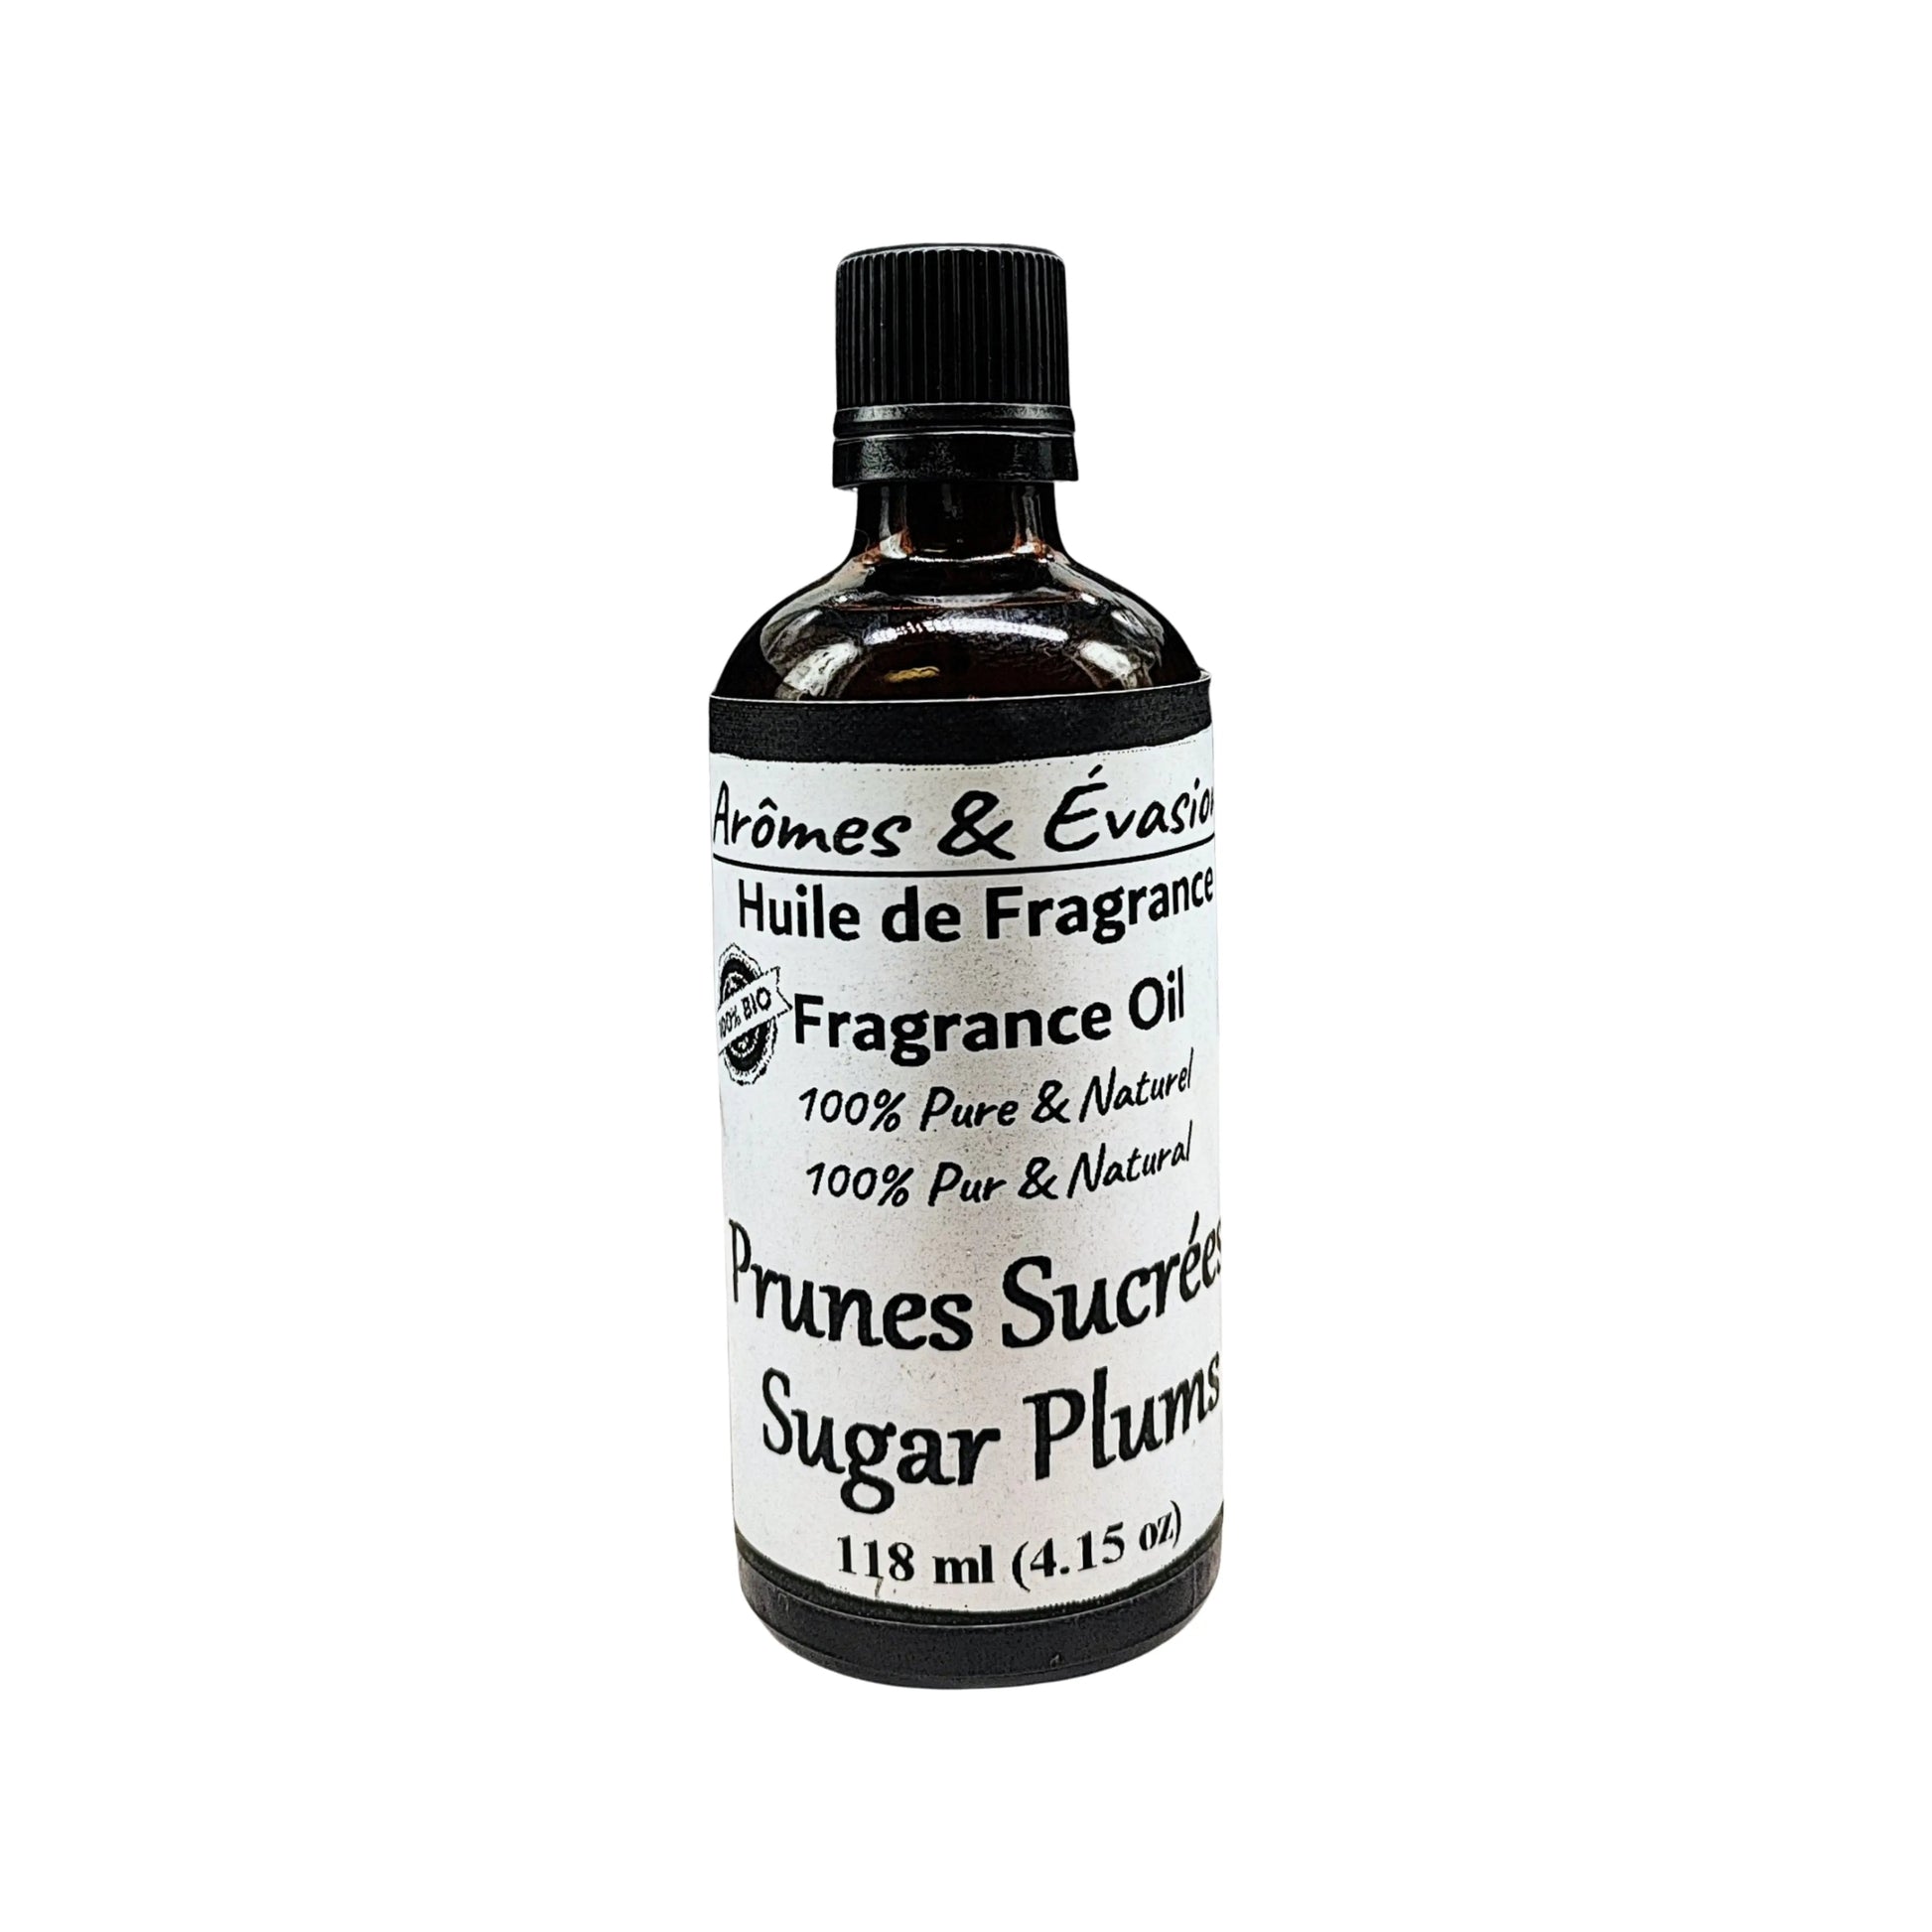 Fragrance Oil -Sugar Plums -Fruity Scent -Aromes Evasions 